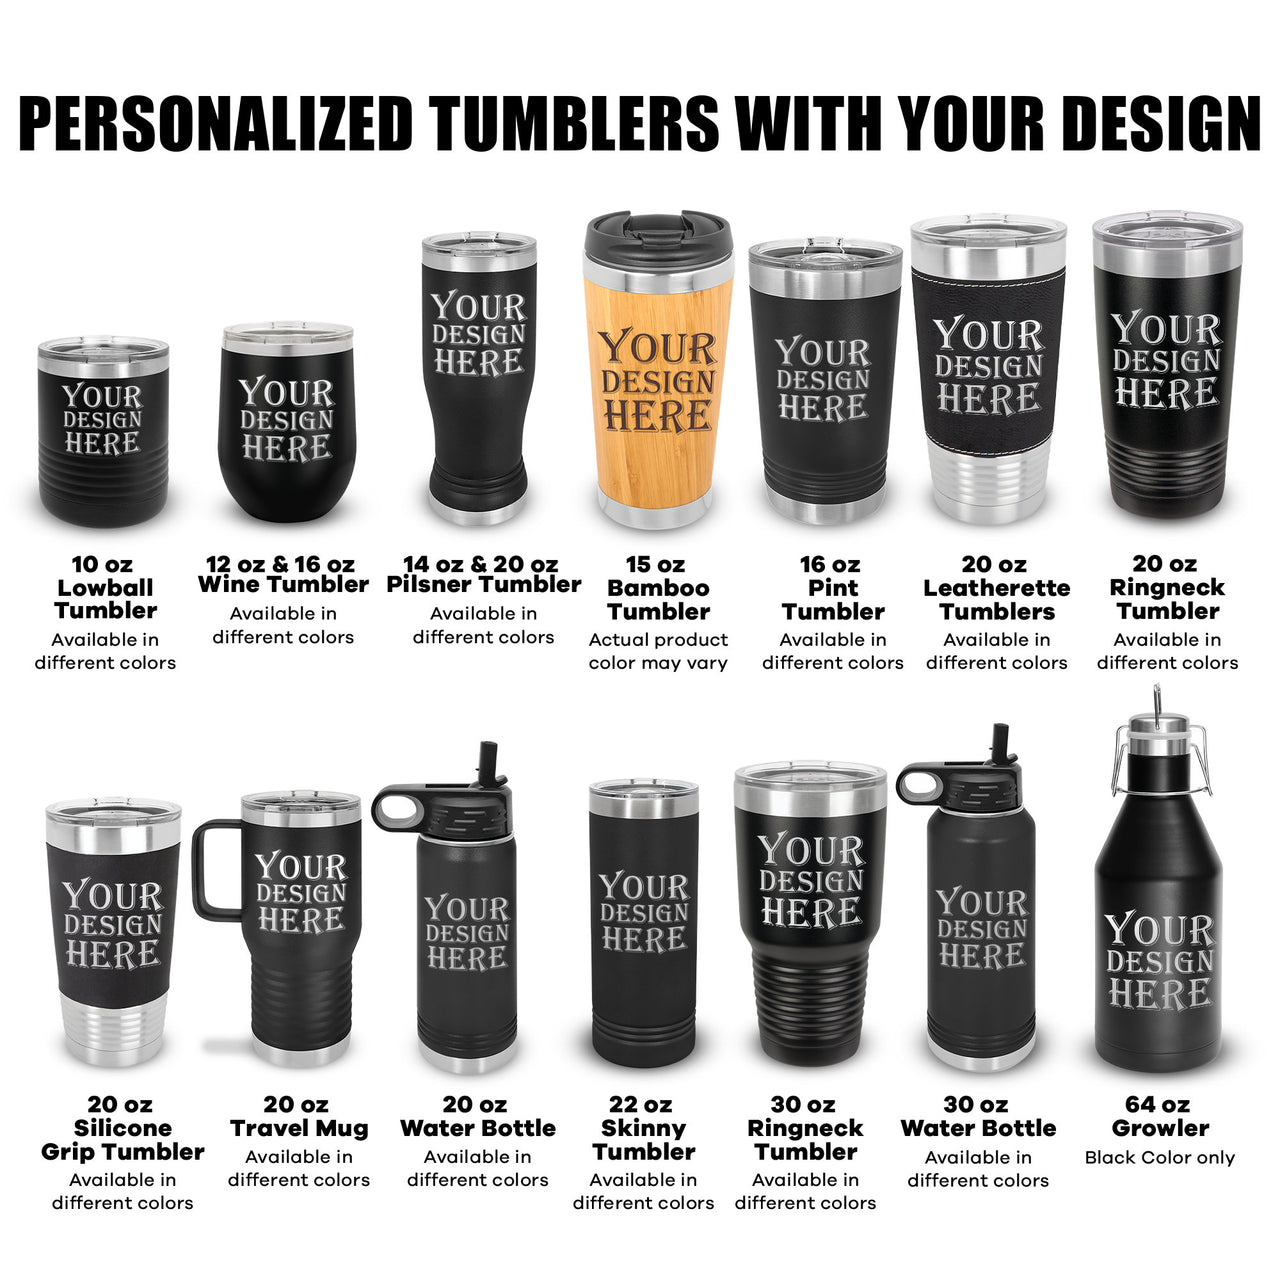 Personalized Men Tumblers | Funny With Great Beard Comes Great Responsibility Tumbler